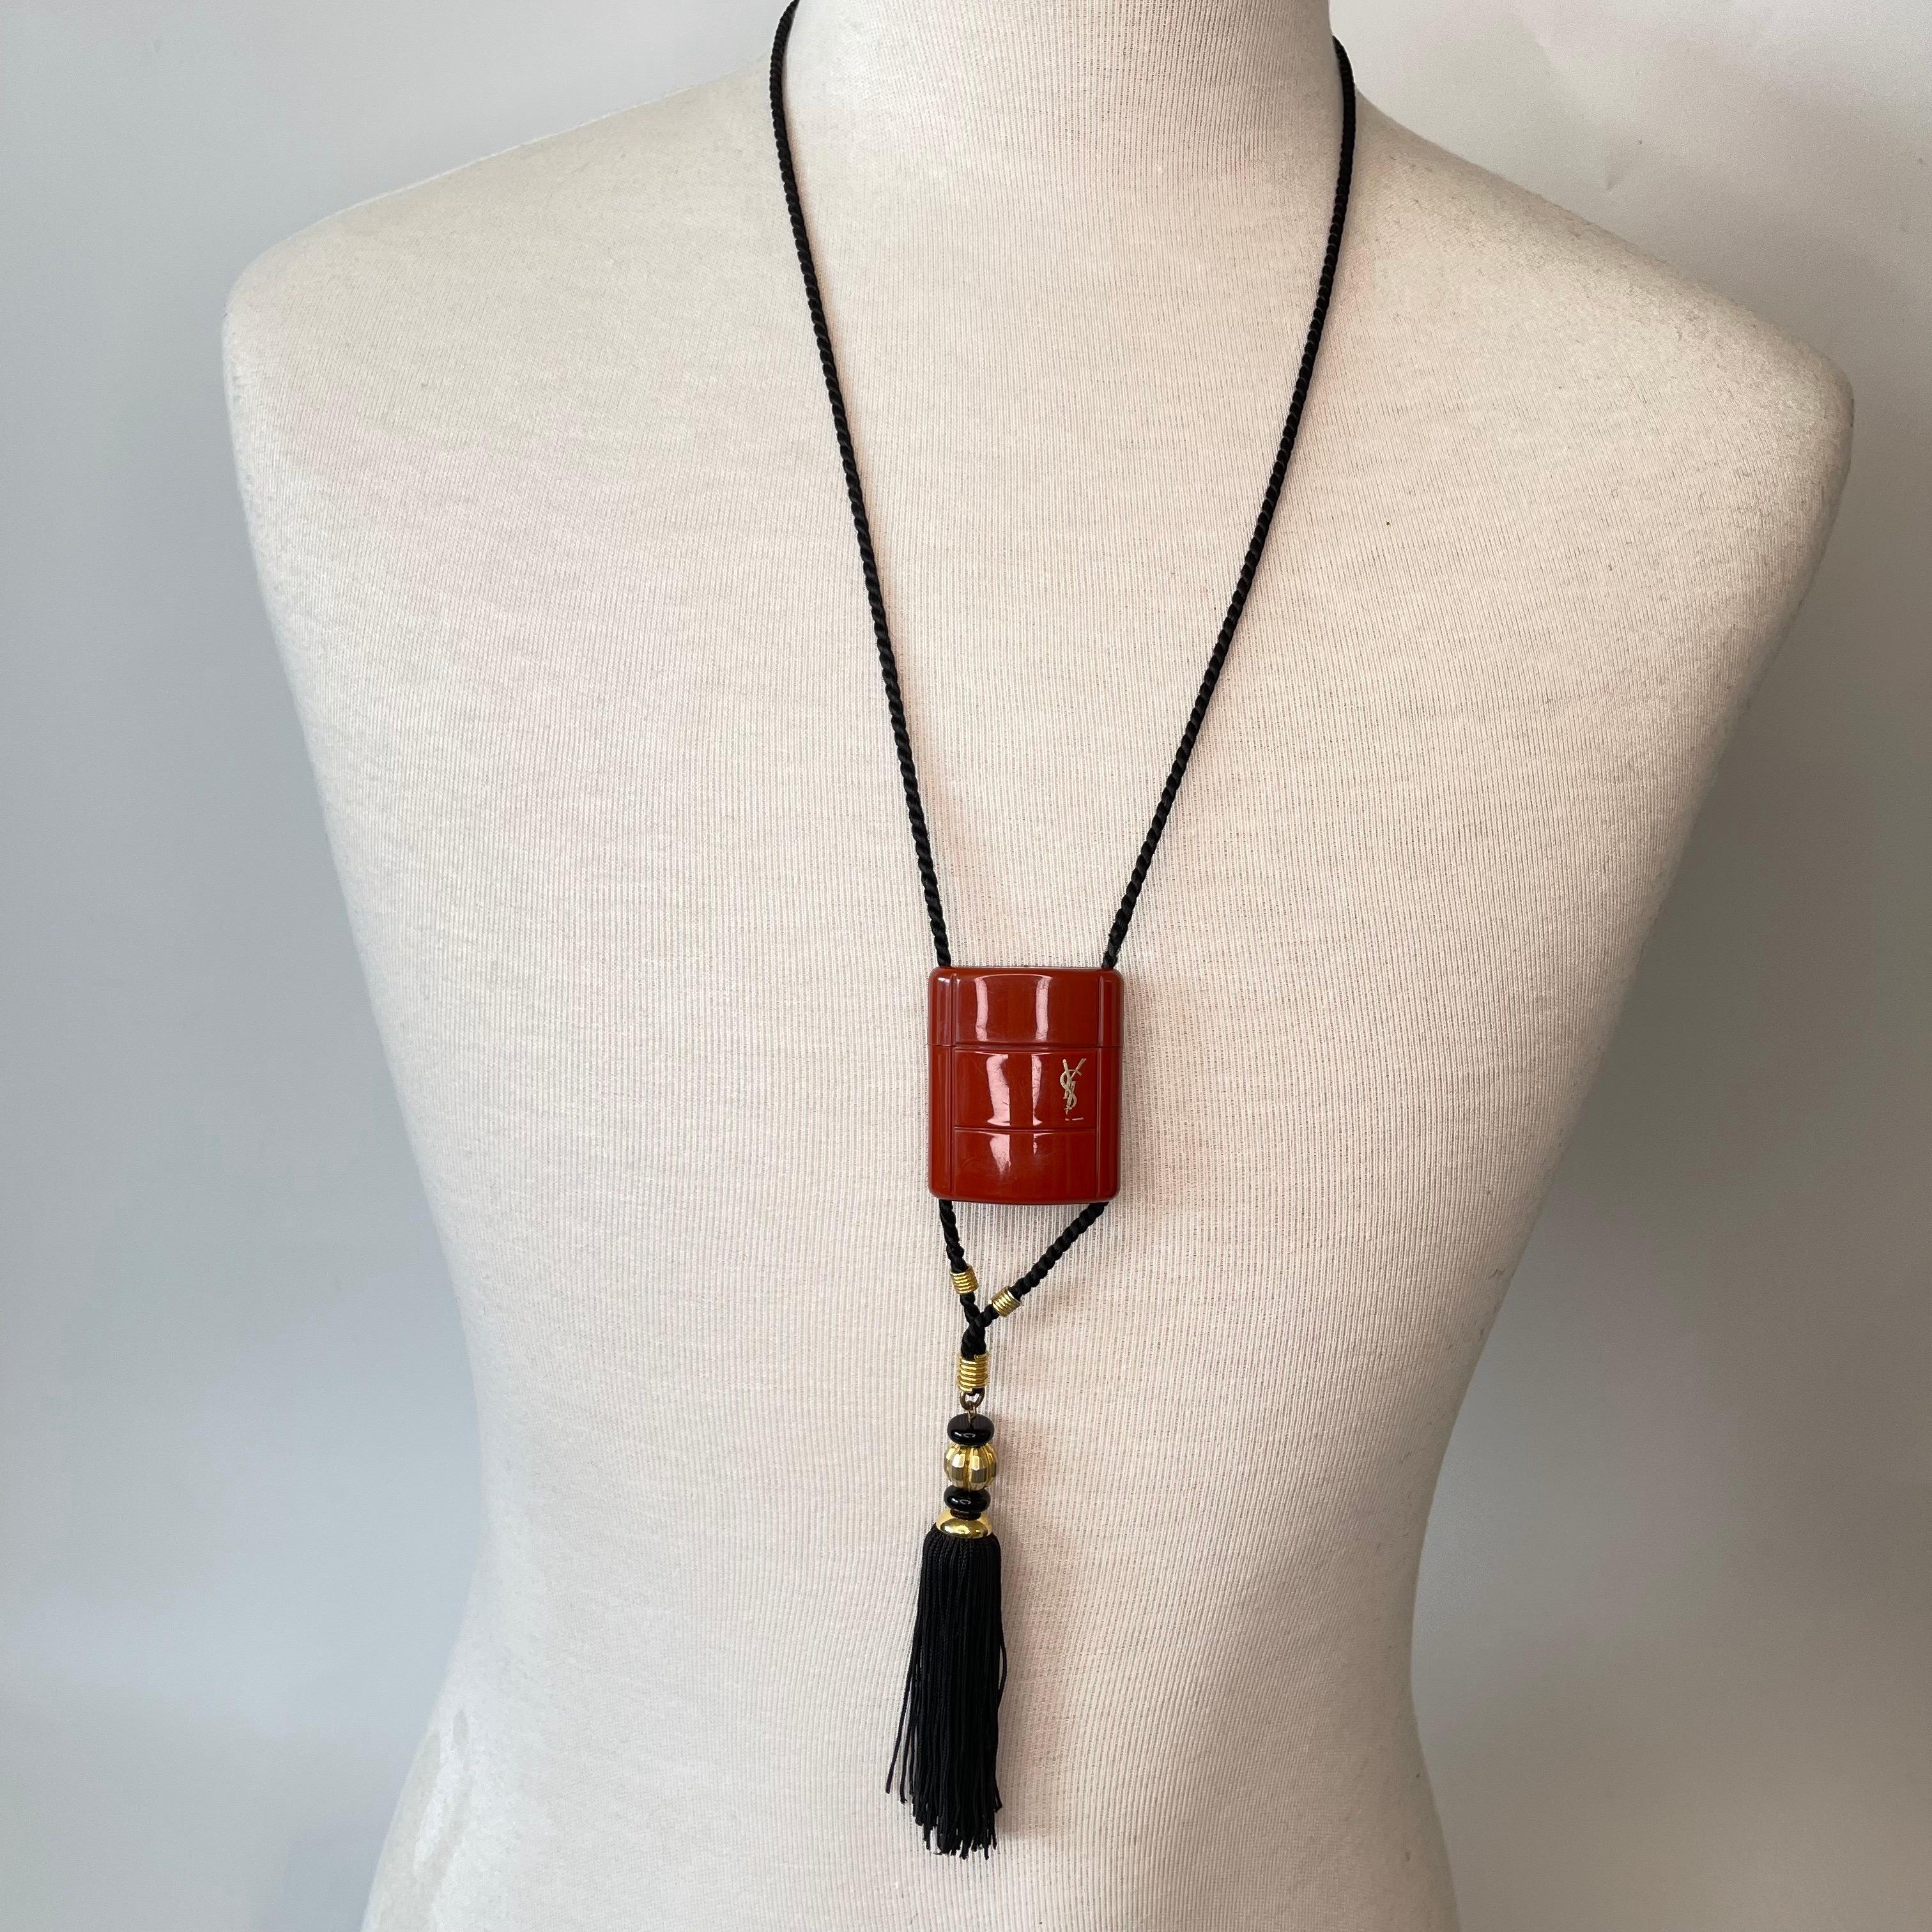 Women's or Men's Yves Saint Laurent VINTAGE Opium Charm Rope Necklace with Tassle 1980’s For Sale